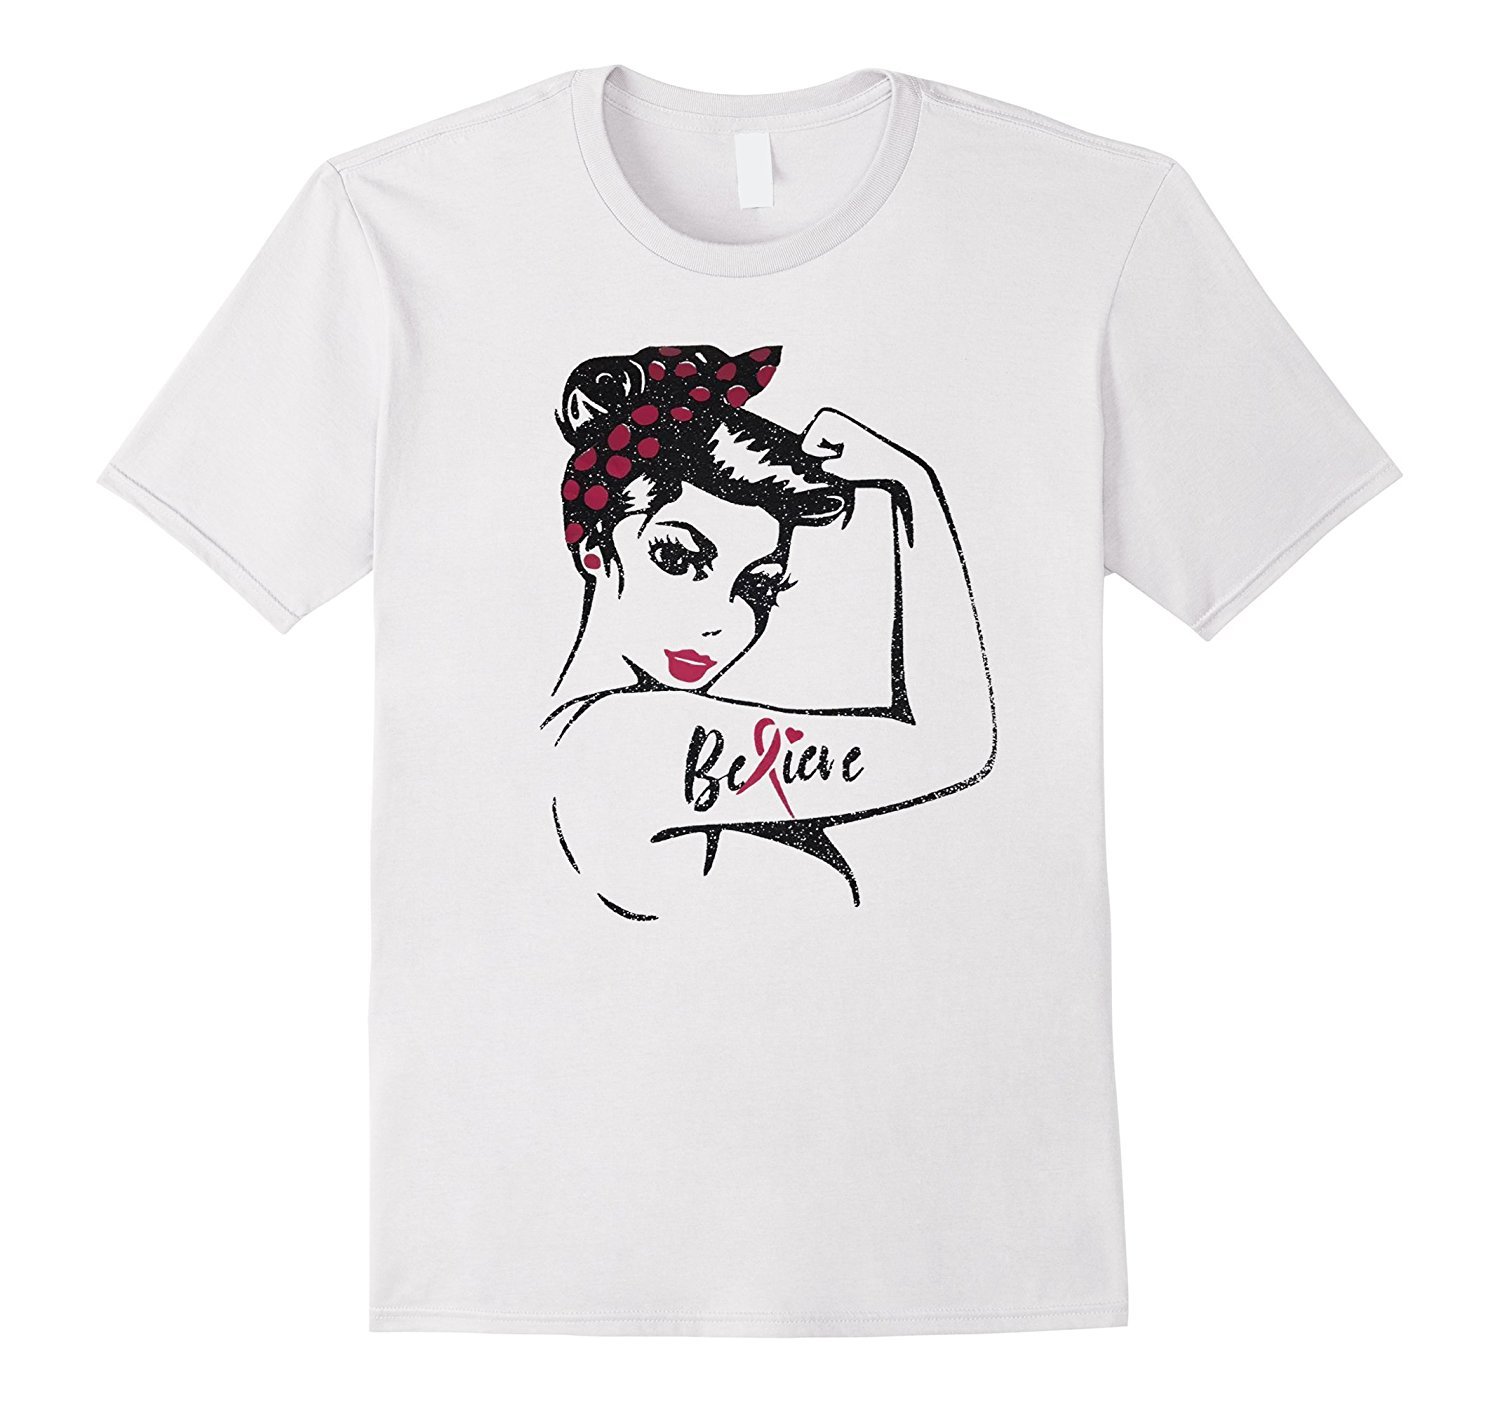 We Can Cure It ' Rosie the Riveter ' Breast Cancer T-Shirt